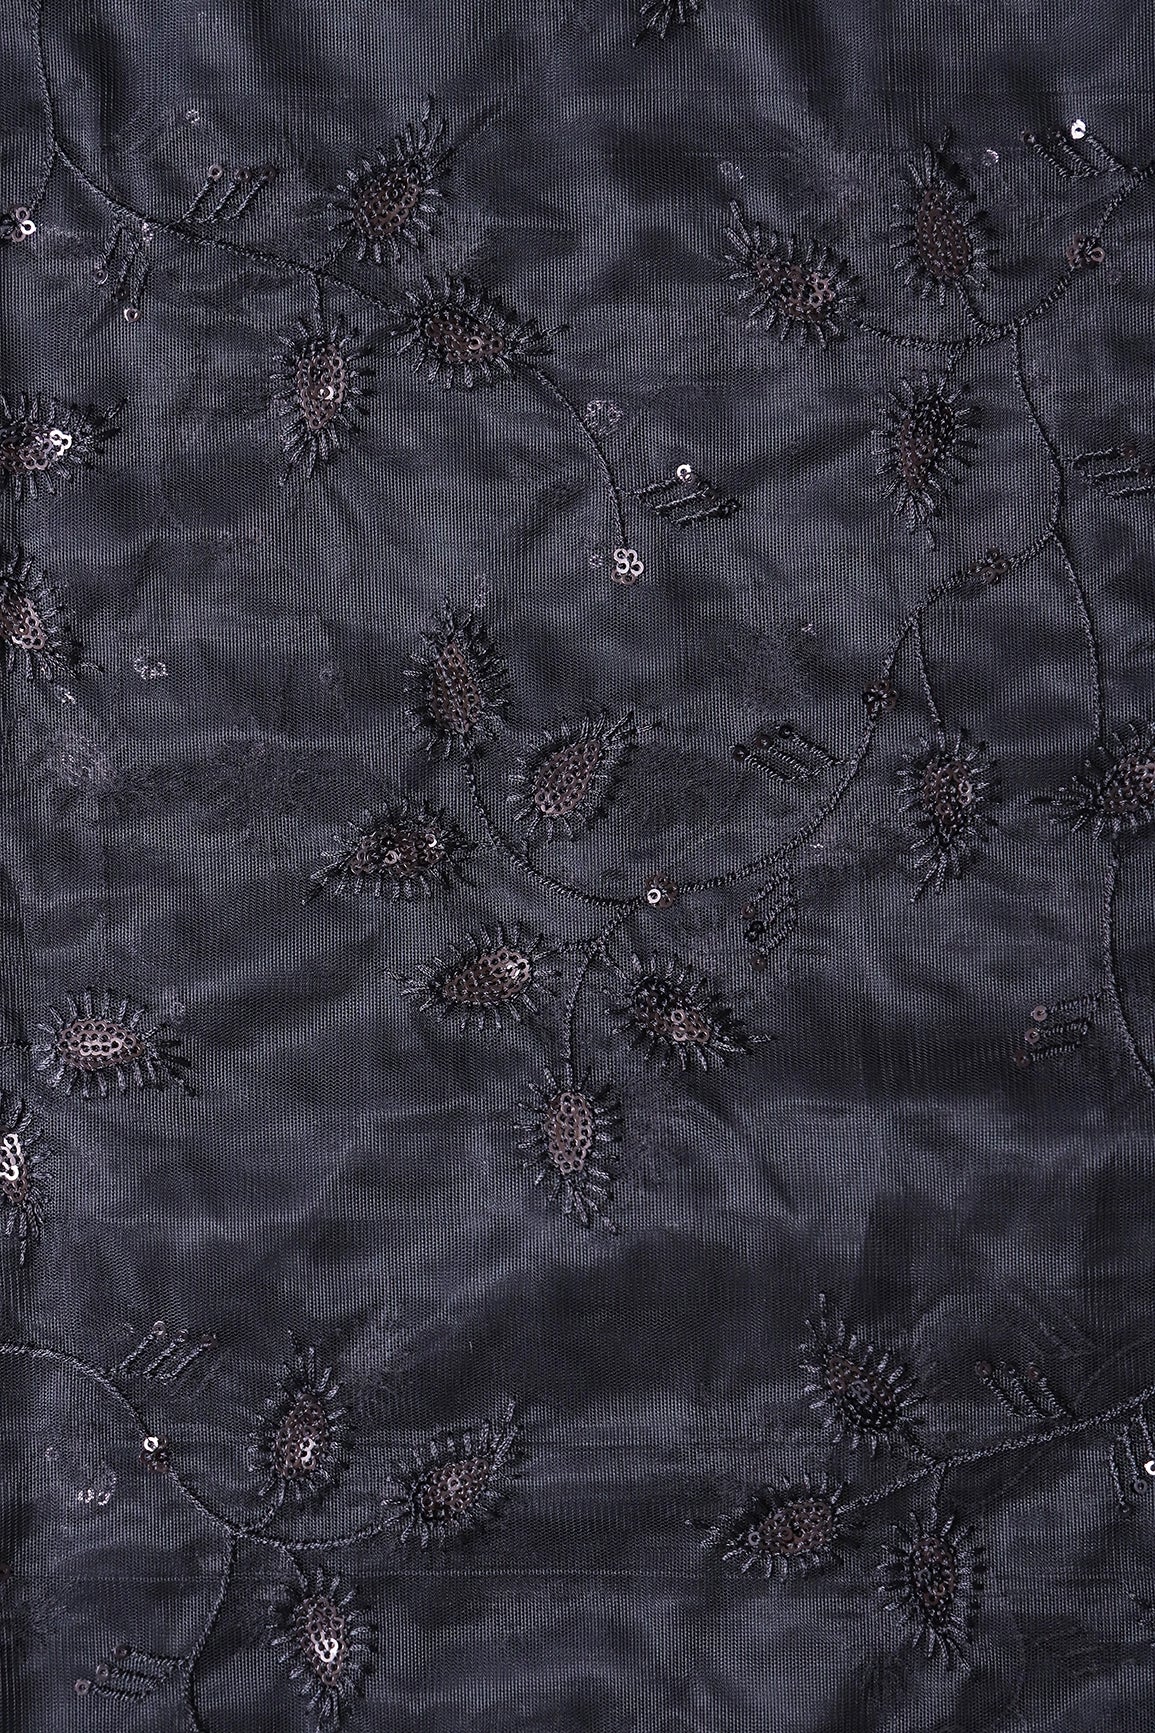 Black Thread With Sequins Beautiful Leafy Embroidery On Black Soft Net Fabric - doeraa